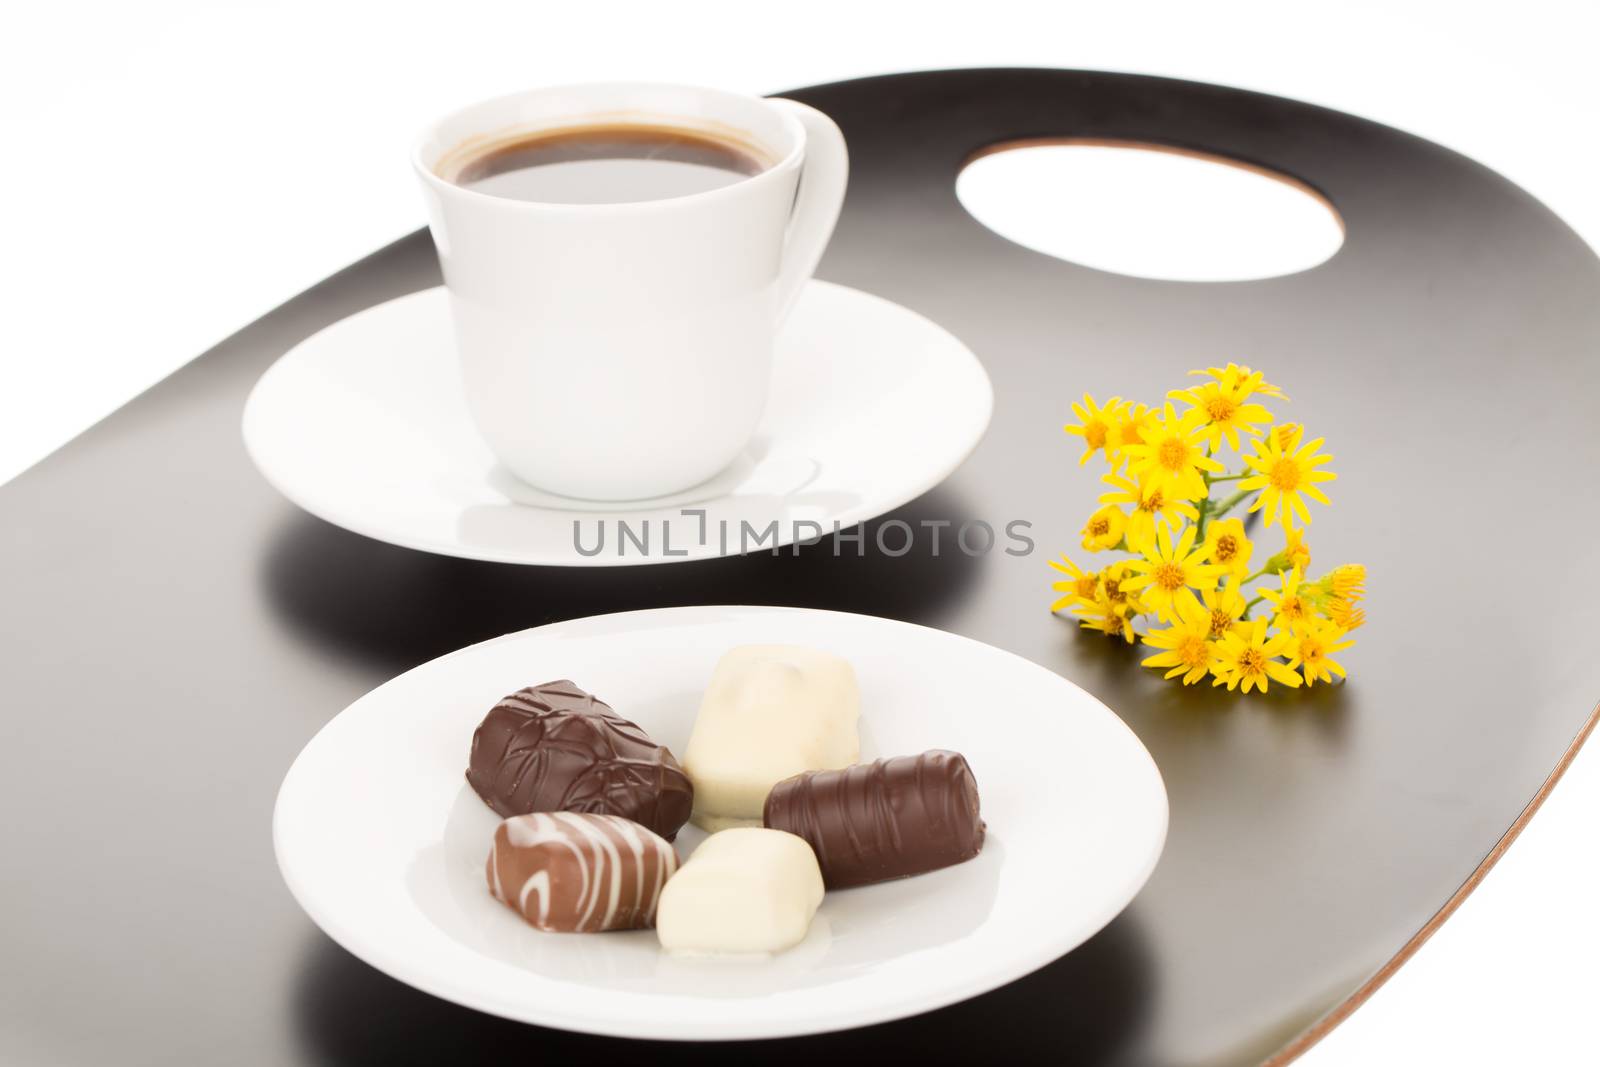 Chocolate and coffee by lusjen_n